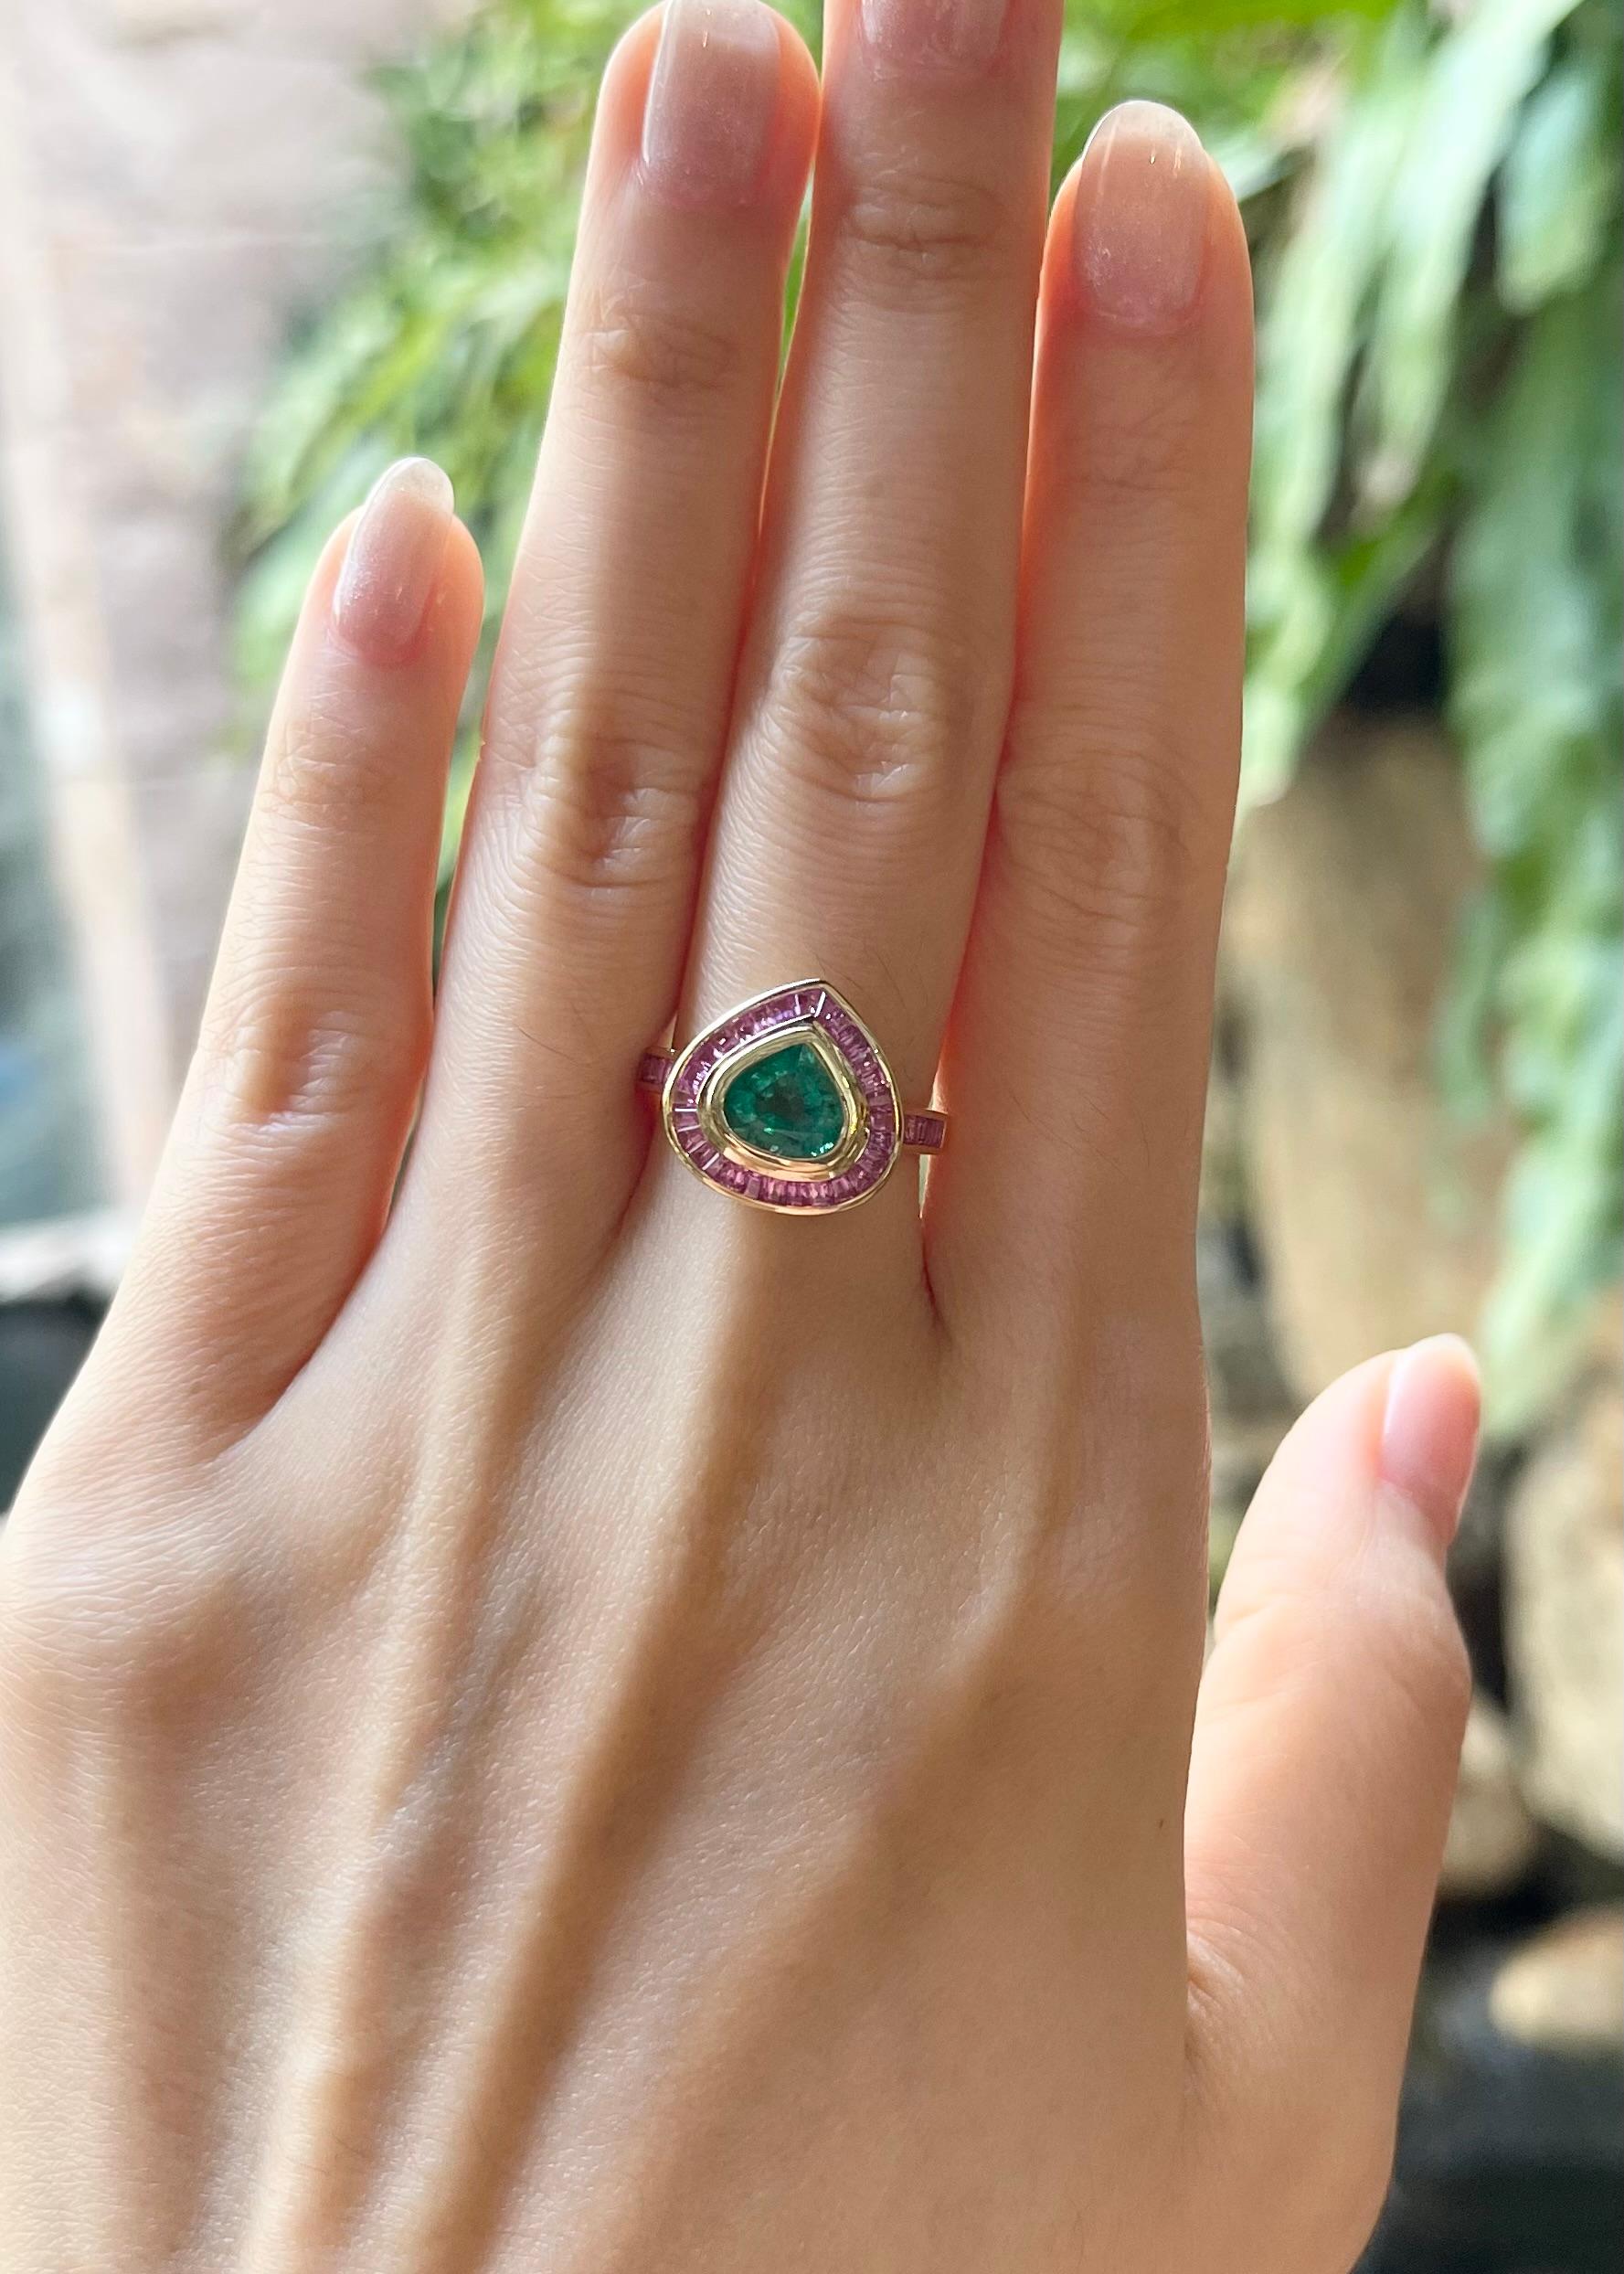 Emerald 1.15 carats with Pink Sapphire 1.10 carat Ring set in 18K Gold Settings

Width:  1.4 cm 
Length: 1.4 cm
Ring Size: 52
Total Weight: 5.32 grams

